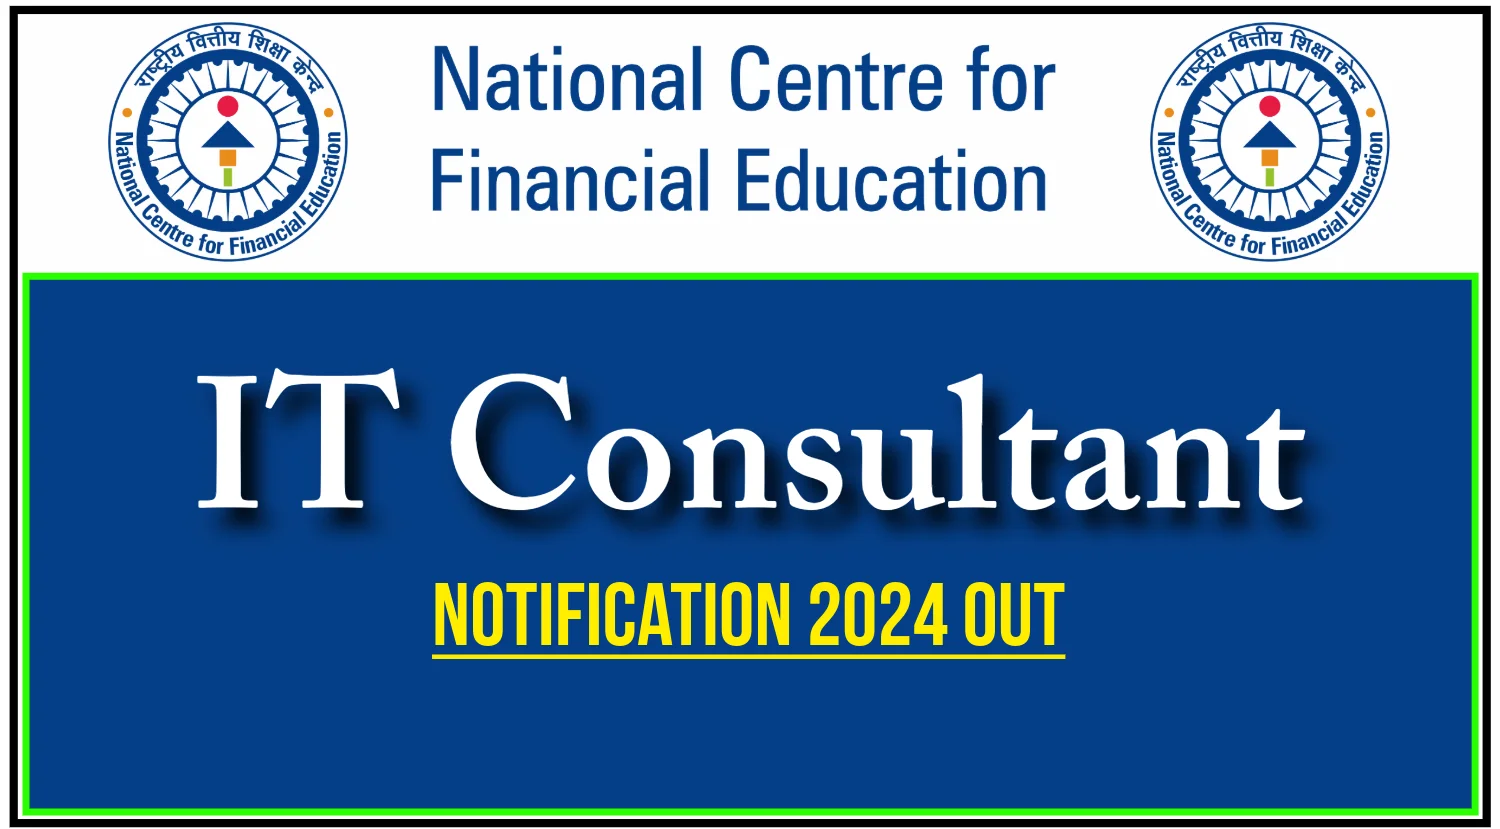 National Centre for Financial Education (NCFE)